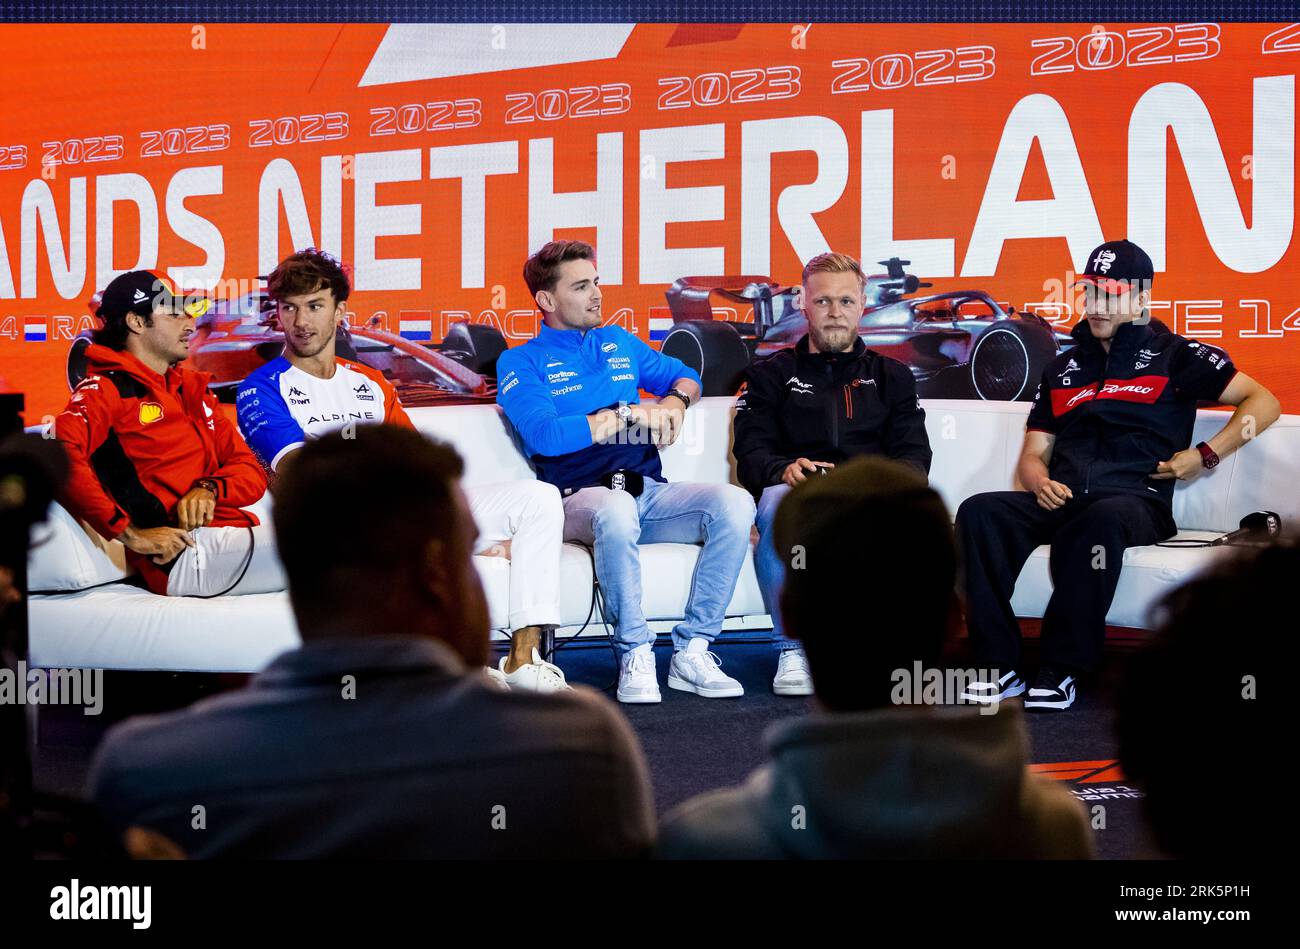 Zandvoort, Netherlands. 24th Aug, 2023. ZANDVOORT - (FLR) Carlos Sainz (Ferrari), Pierre Gasly (Alpine), Logan Sargeant (Williams), Kevin Magnussen (Haas F1 Team) and Zhou Guanyu (Alfa Romeo) during the track press conference at the Zandvoort Circuit prior to the F1 Grand Prix of the Netherlands on August 24, 2023 in Zandvoort, Netherlands. ANP REMKO DE WAAL Credit: ANP/Alamy Live News Stock Photo